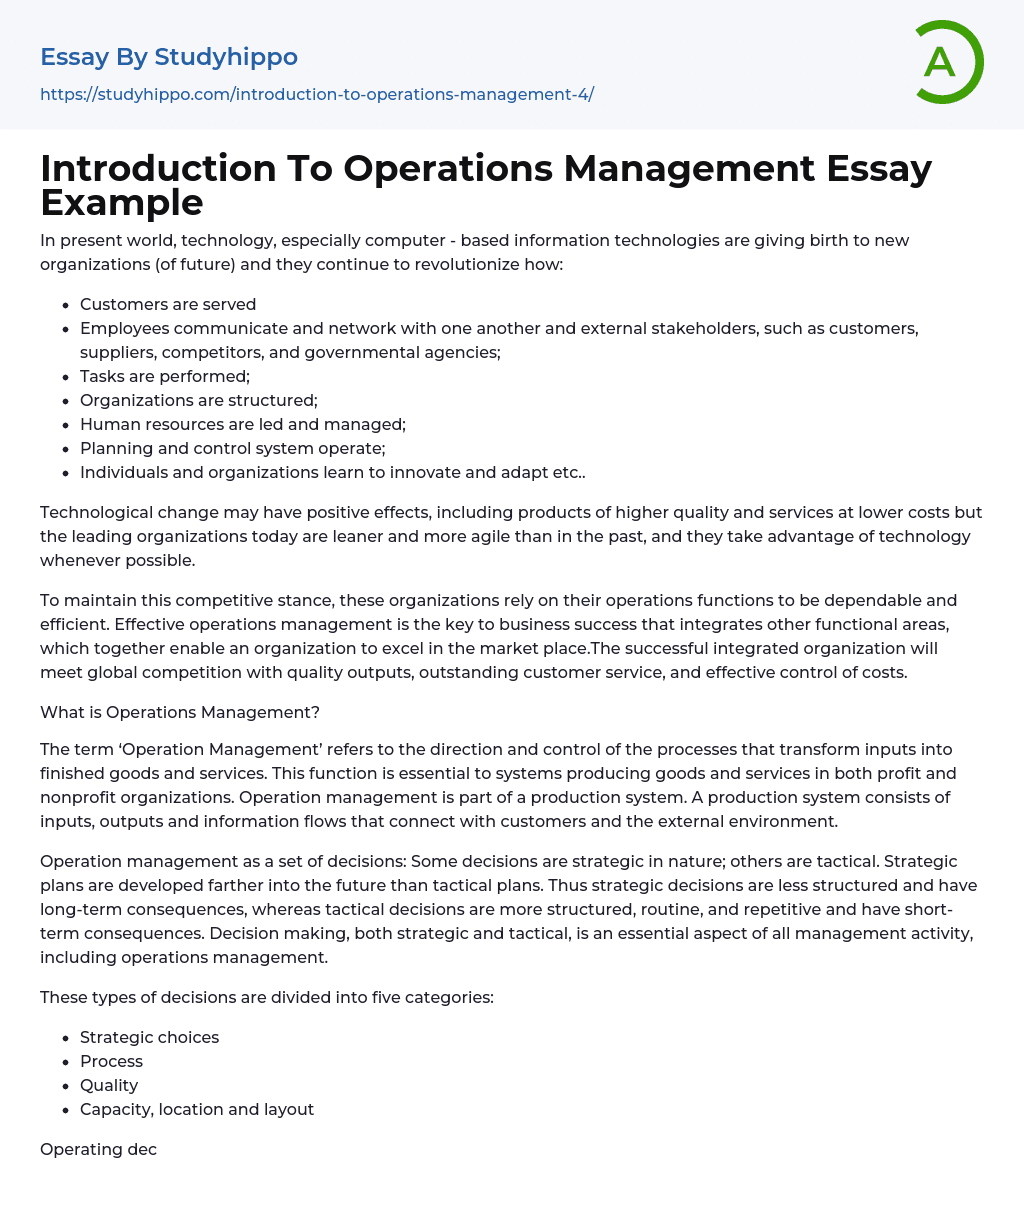 Introduction To Operations Management Essay Example